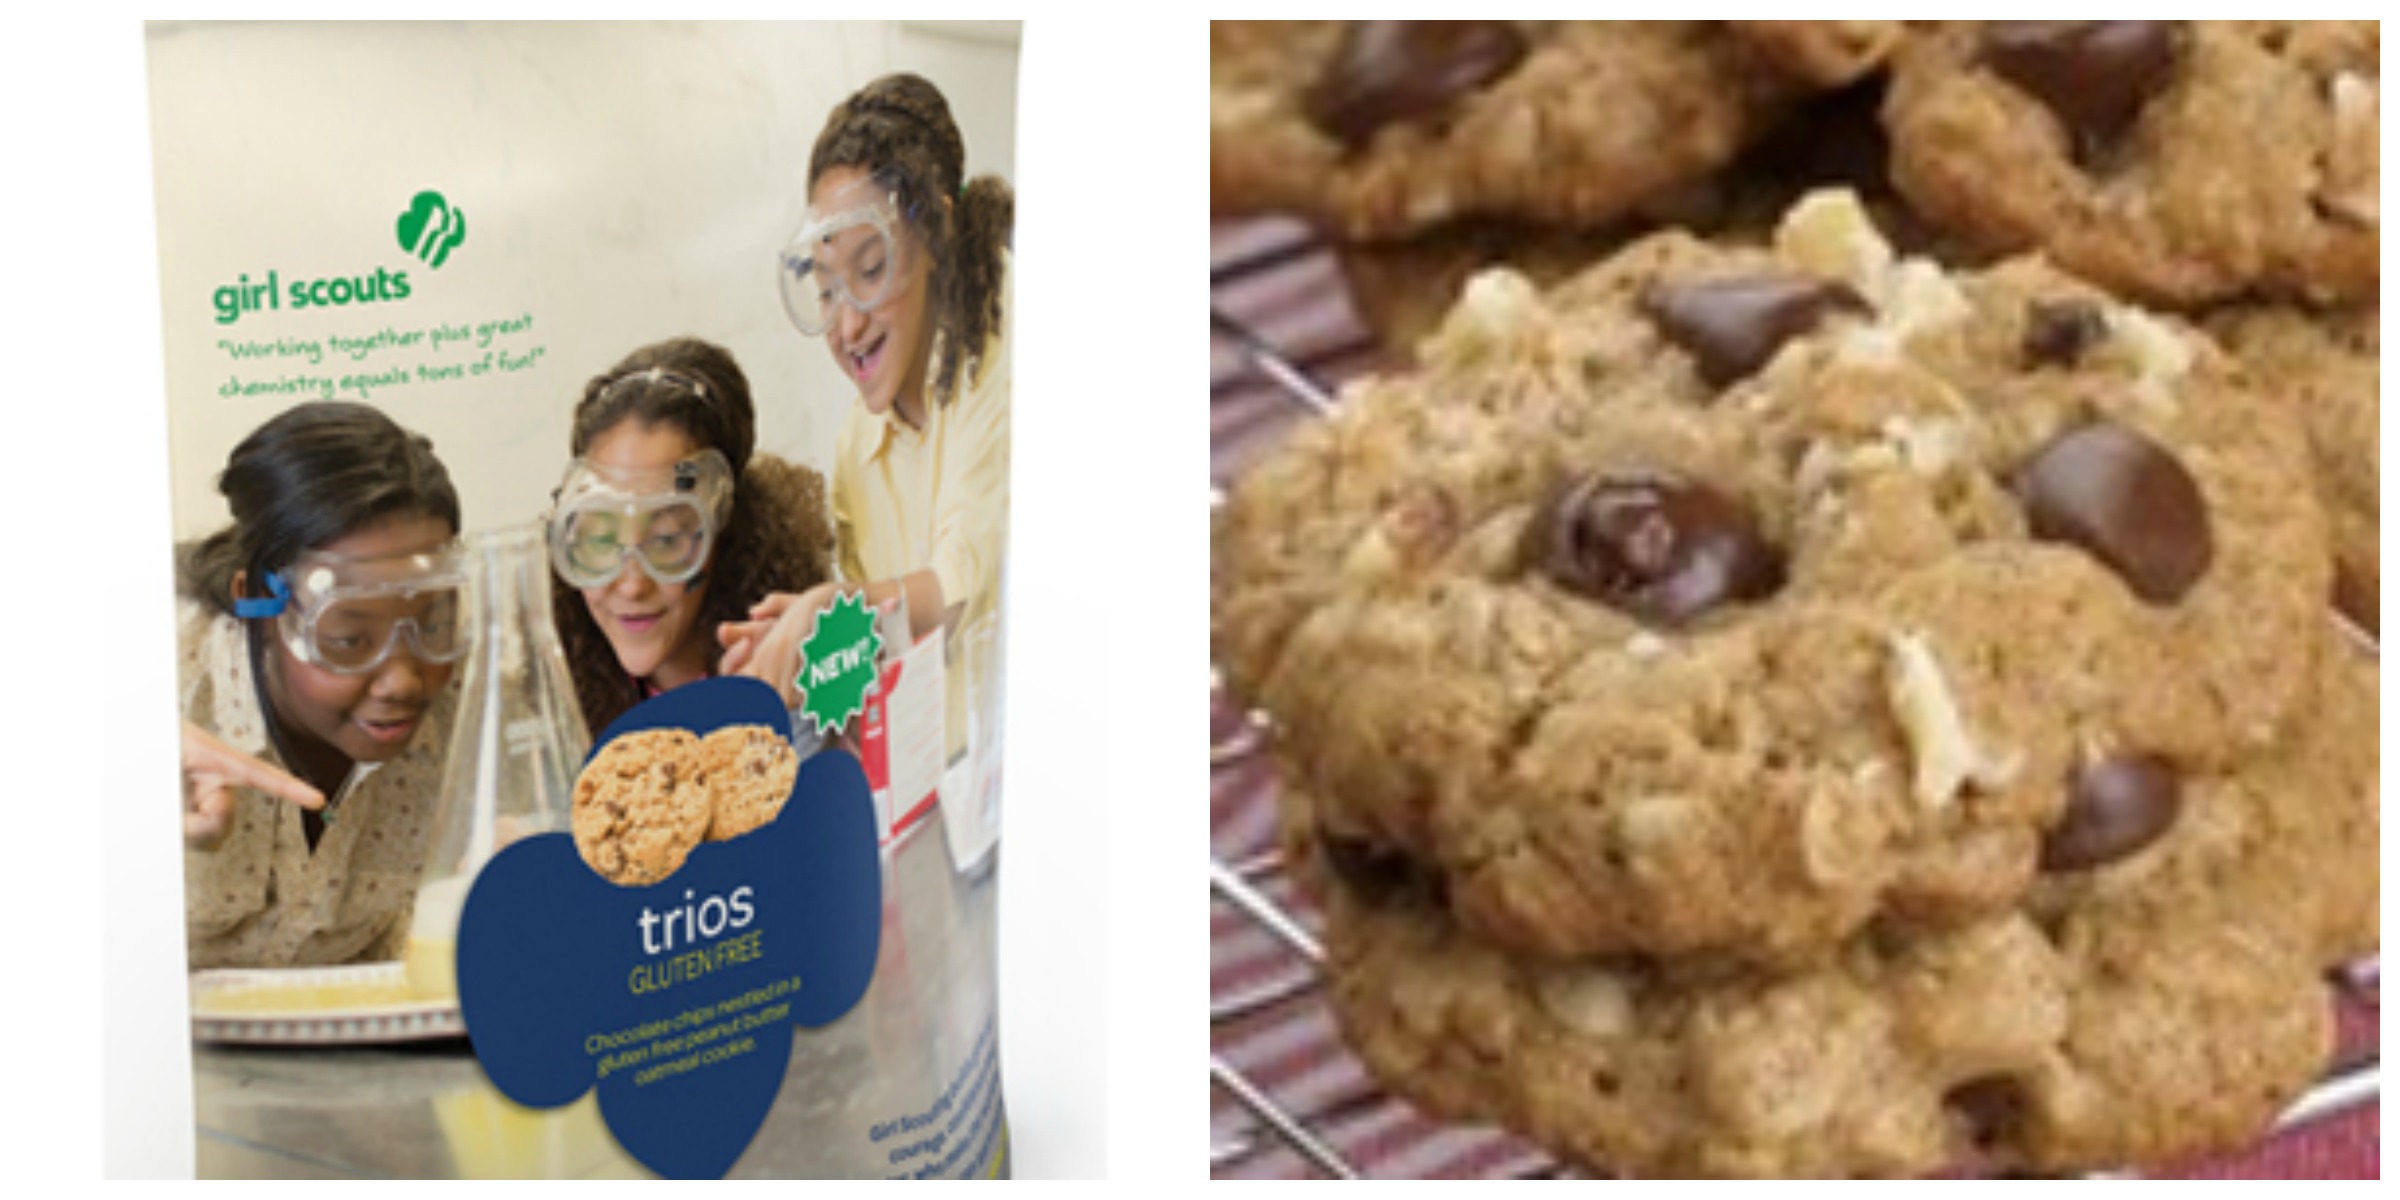 trios girl scout cookie